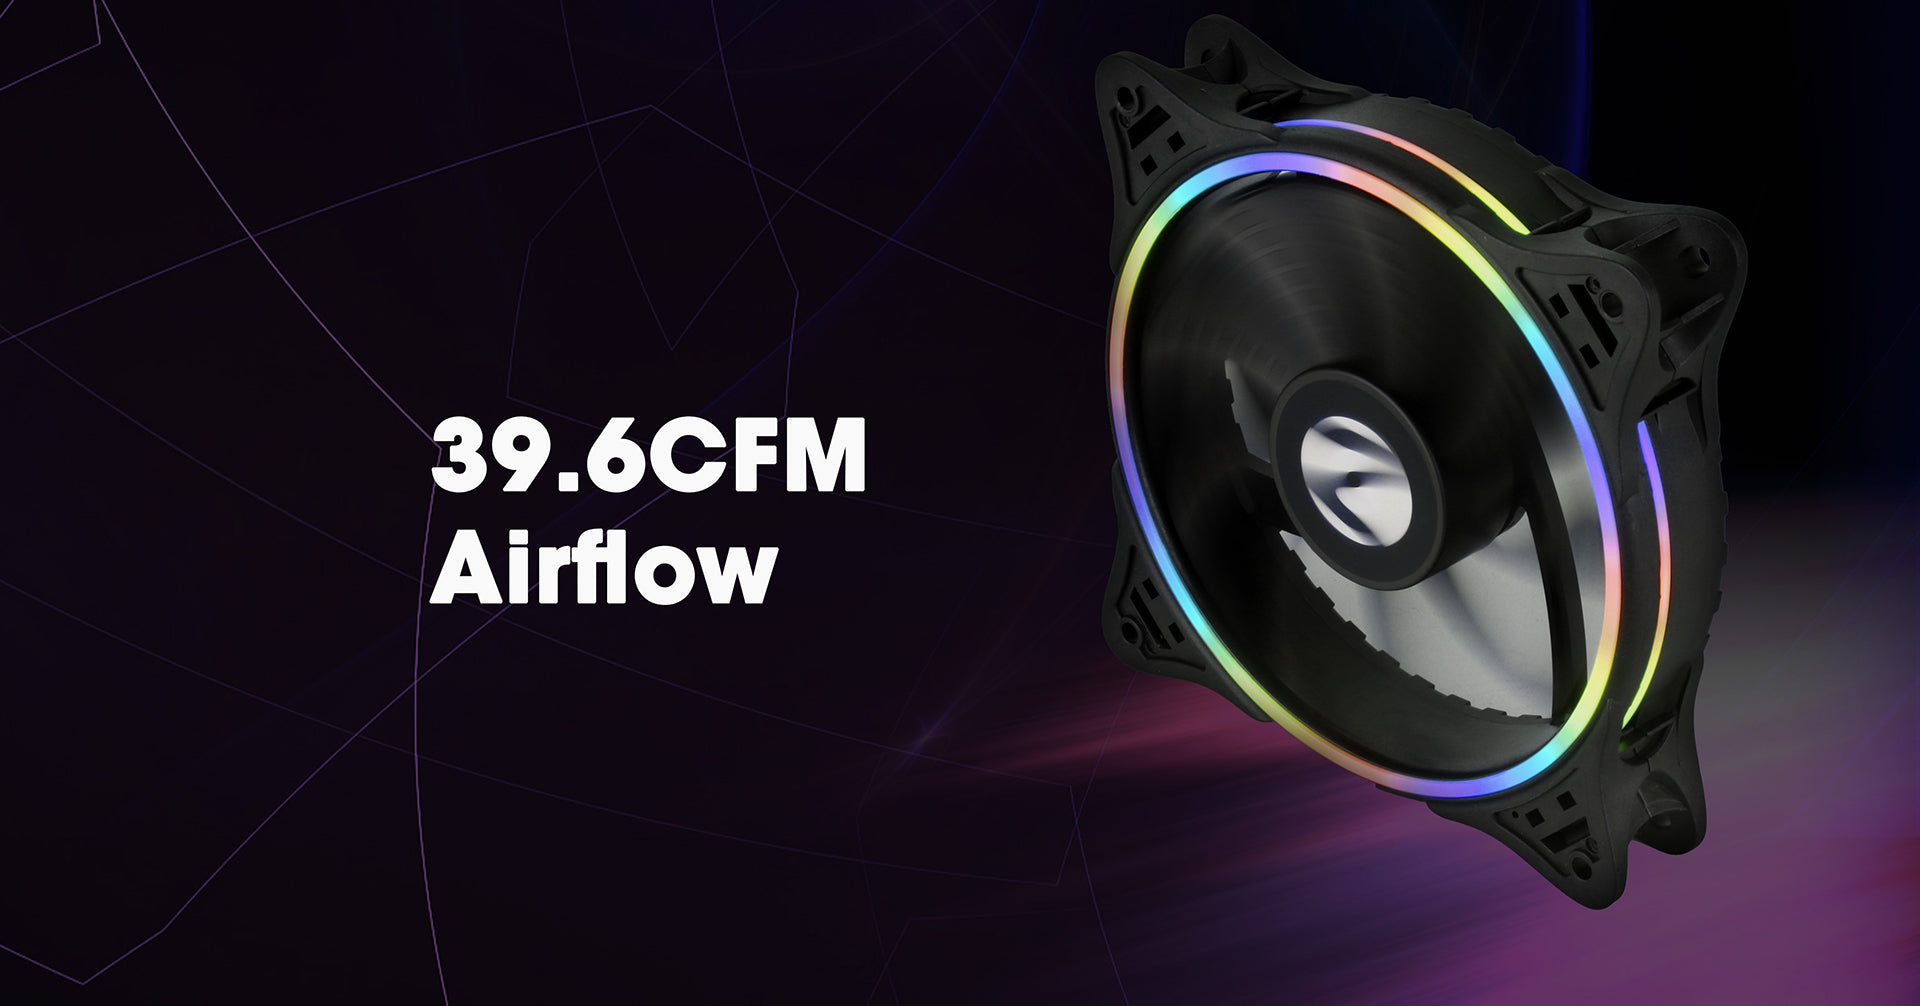 Ant Esports Superflow120 Auto RGB Fan Specifications Video | Learn more  about your favorite Case Fan; Ant Esports RoyaleFlow 120 Auto RGB Fan.  #AntEsports #AntEsportsSuperFlow120 #SuperFlow120 #ARGBFan... | By Ant  Esports | Facebook